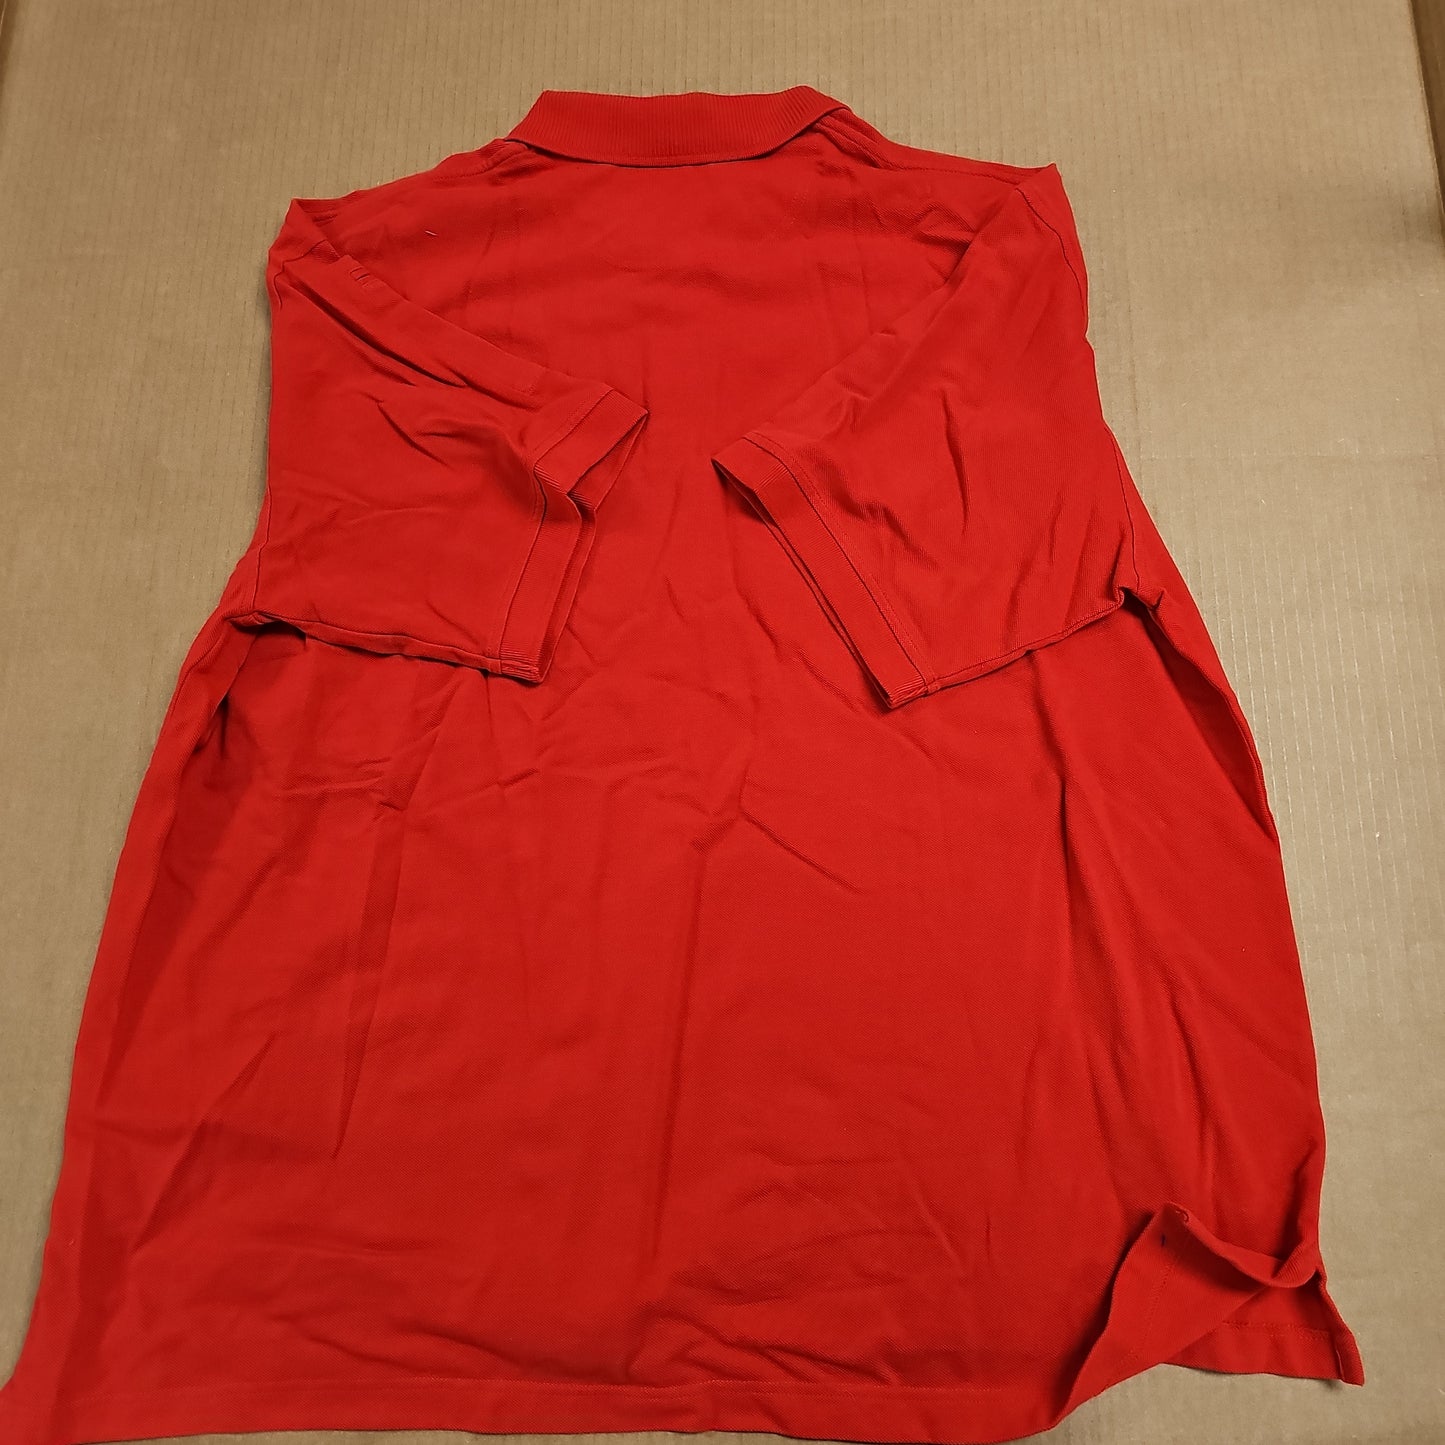 POLO SHIRT: S/S PROFESSIONAL, RED, XXX-LARGE 41060-477-3XL